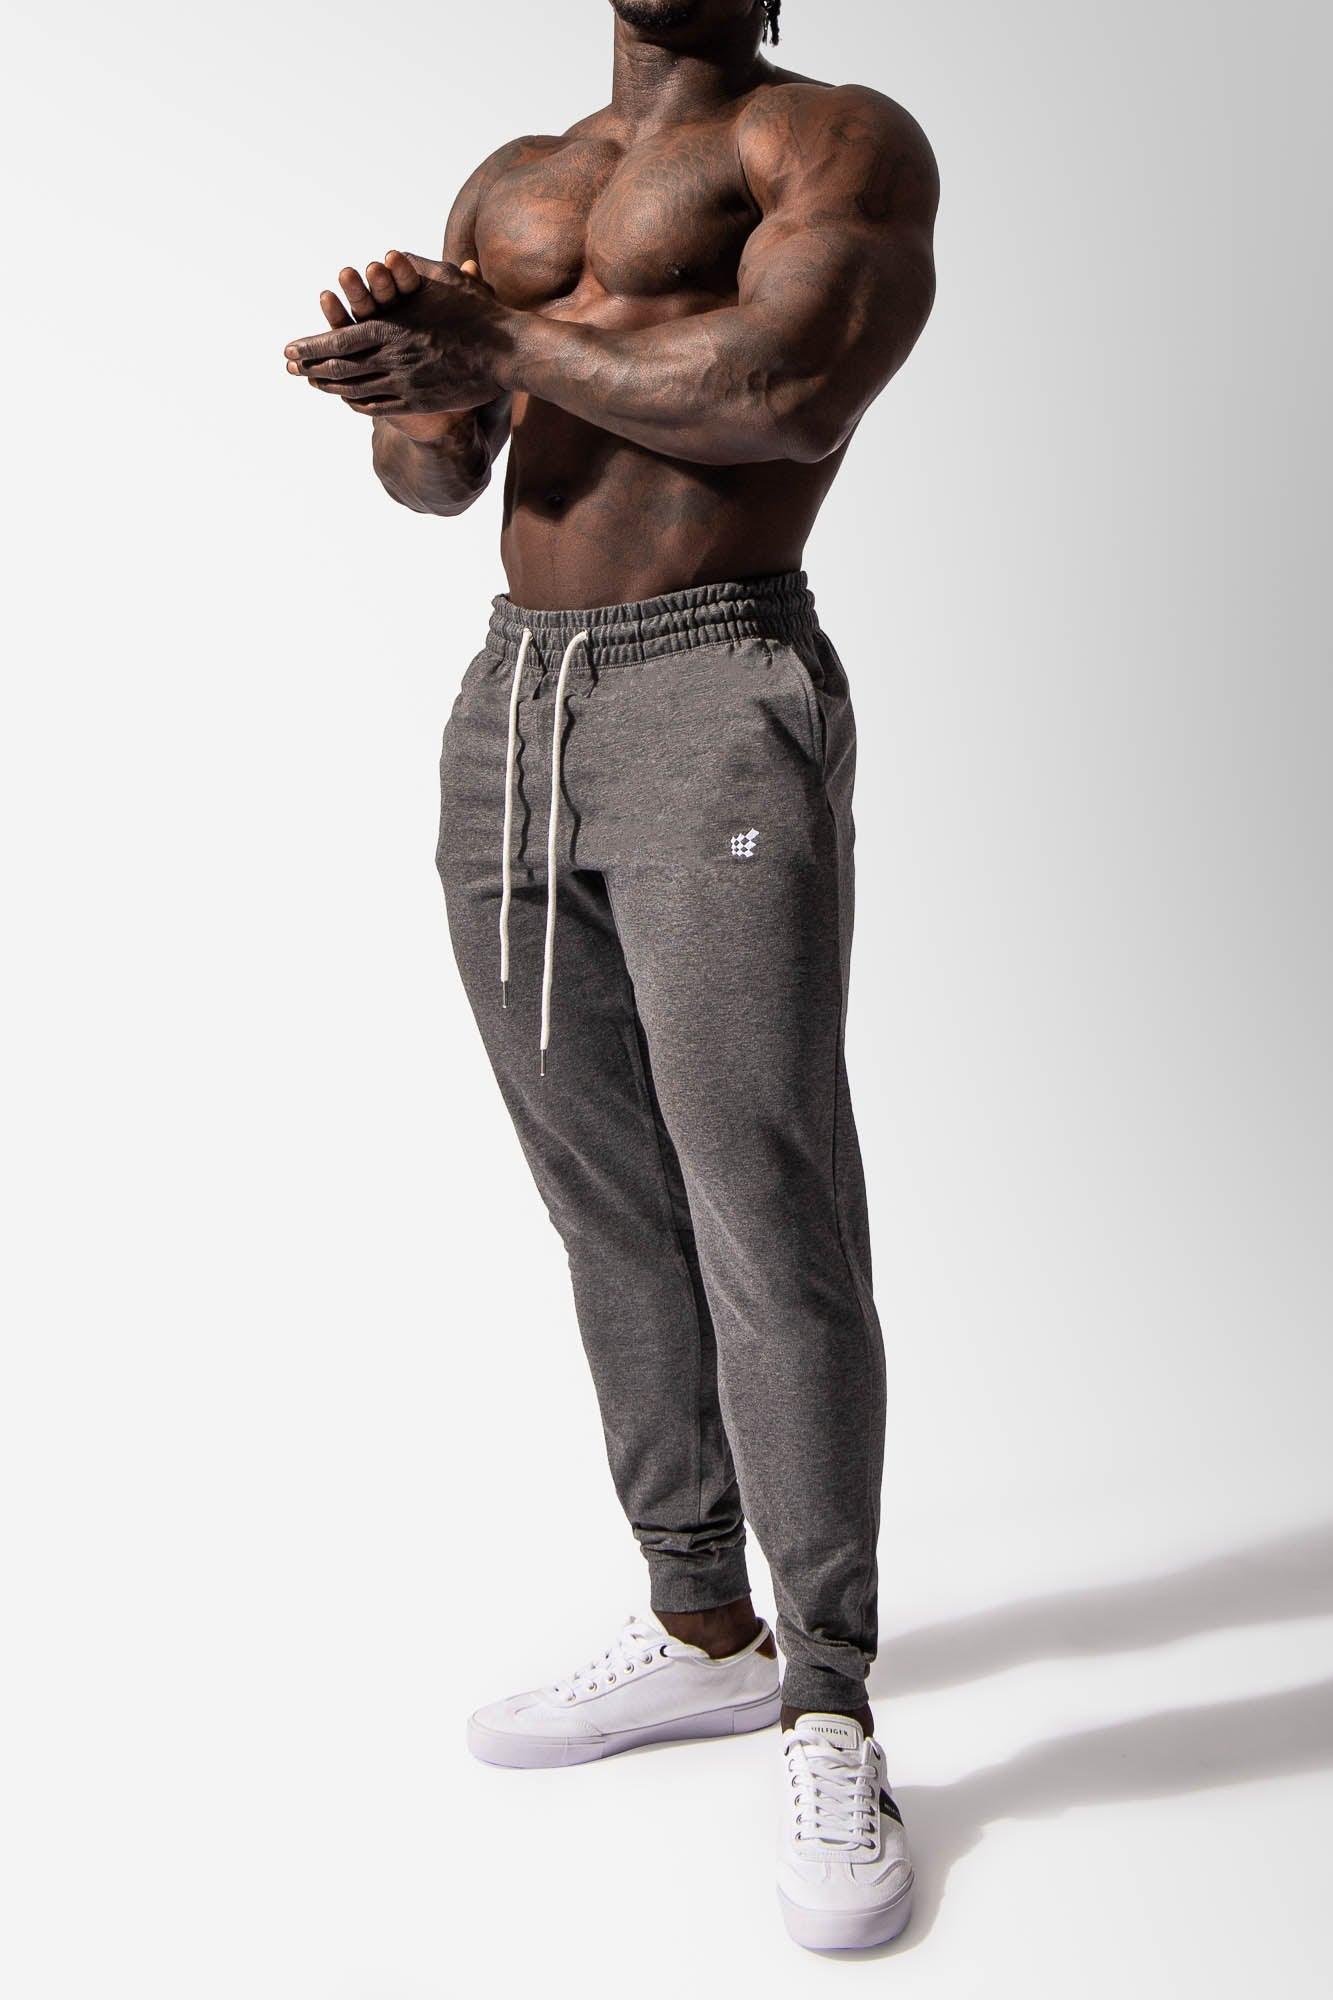 Workout Joggers for Men, Bodybuilding & Fitness Gym Wear, Jed North